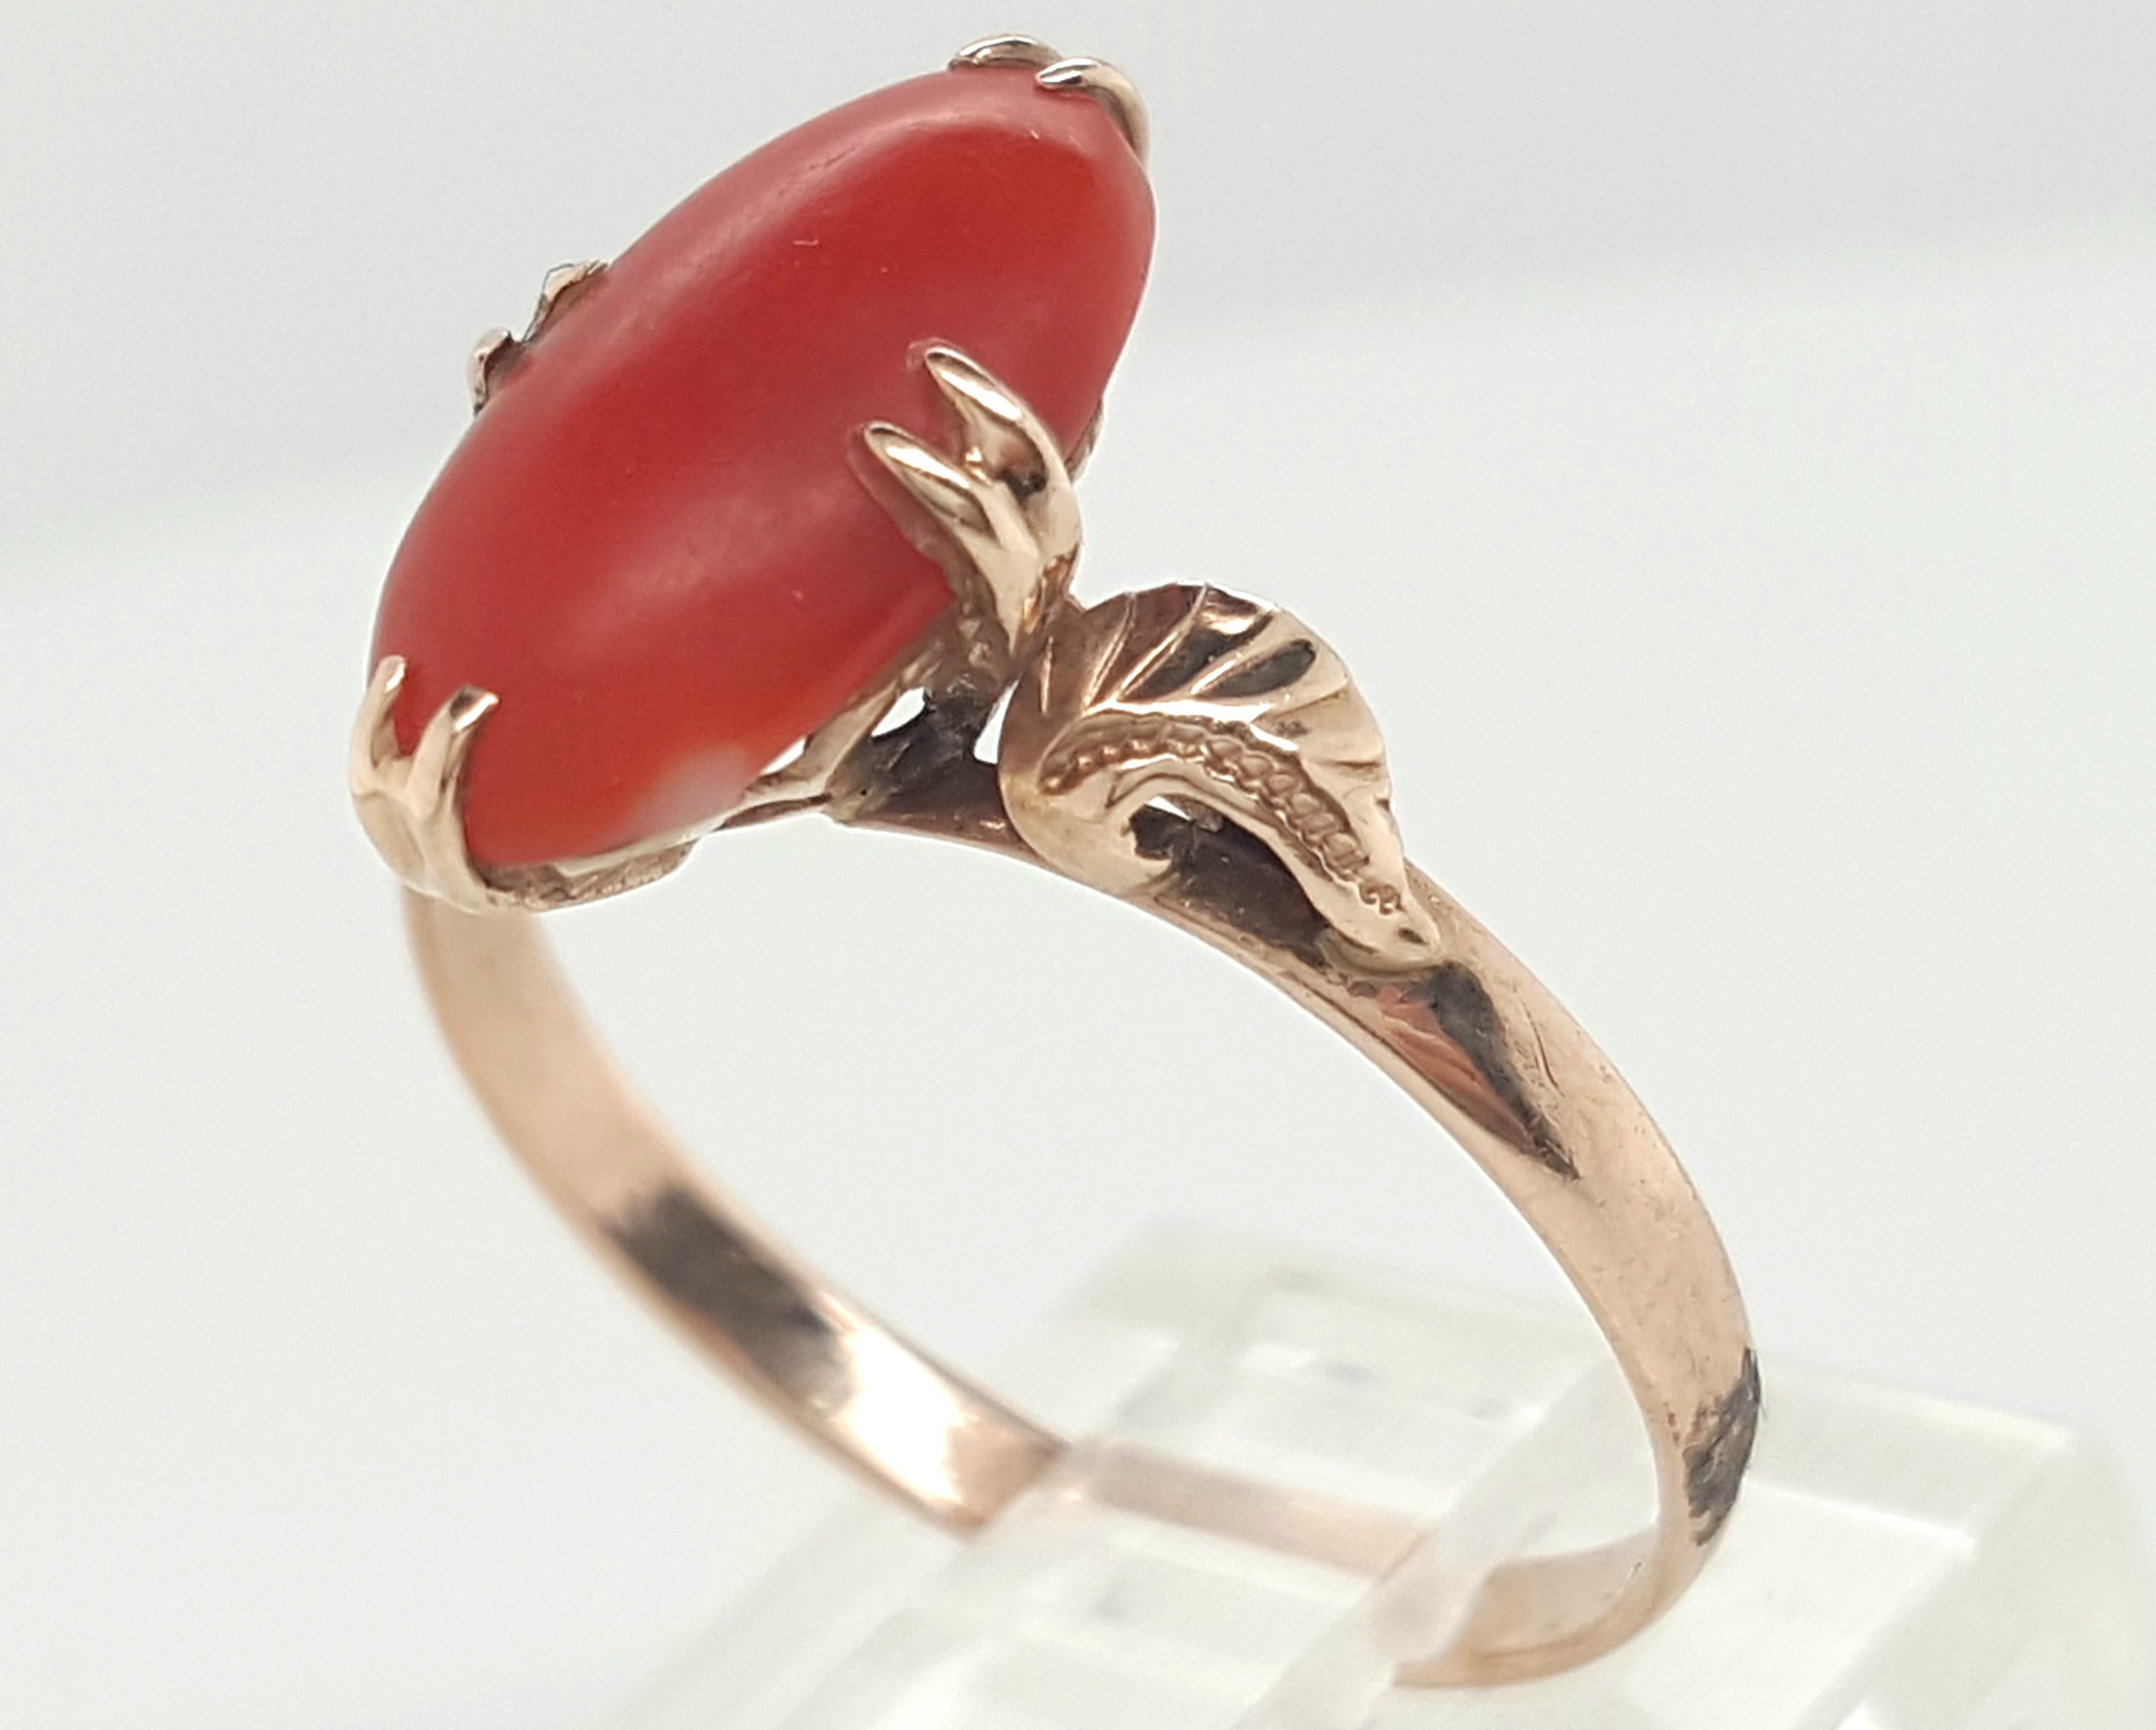 Women's Art Deco Oval Cut Precious Coral 14 Karat Yellow Gold Ring For Sale